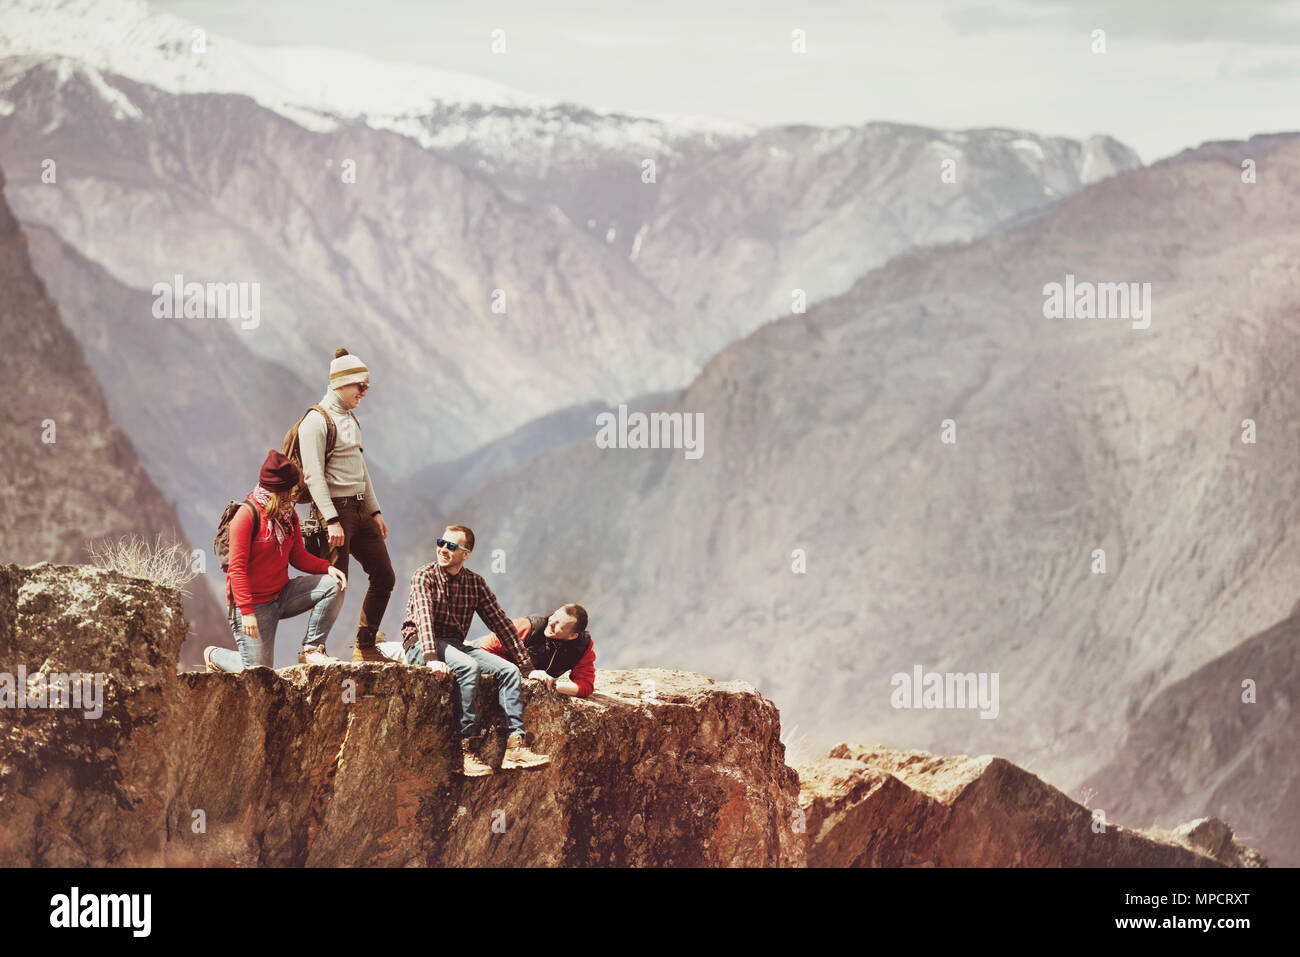 Group of tourists on cliff against mountains Stock Photo